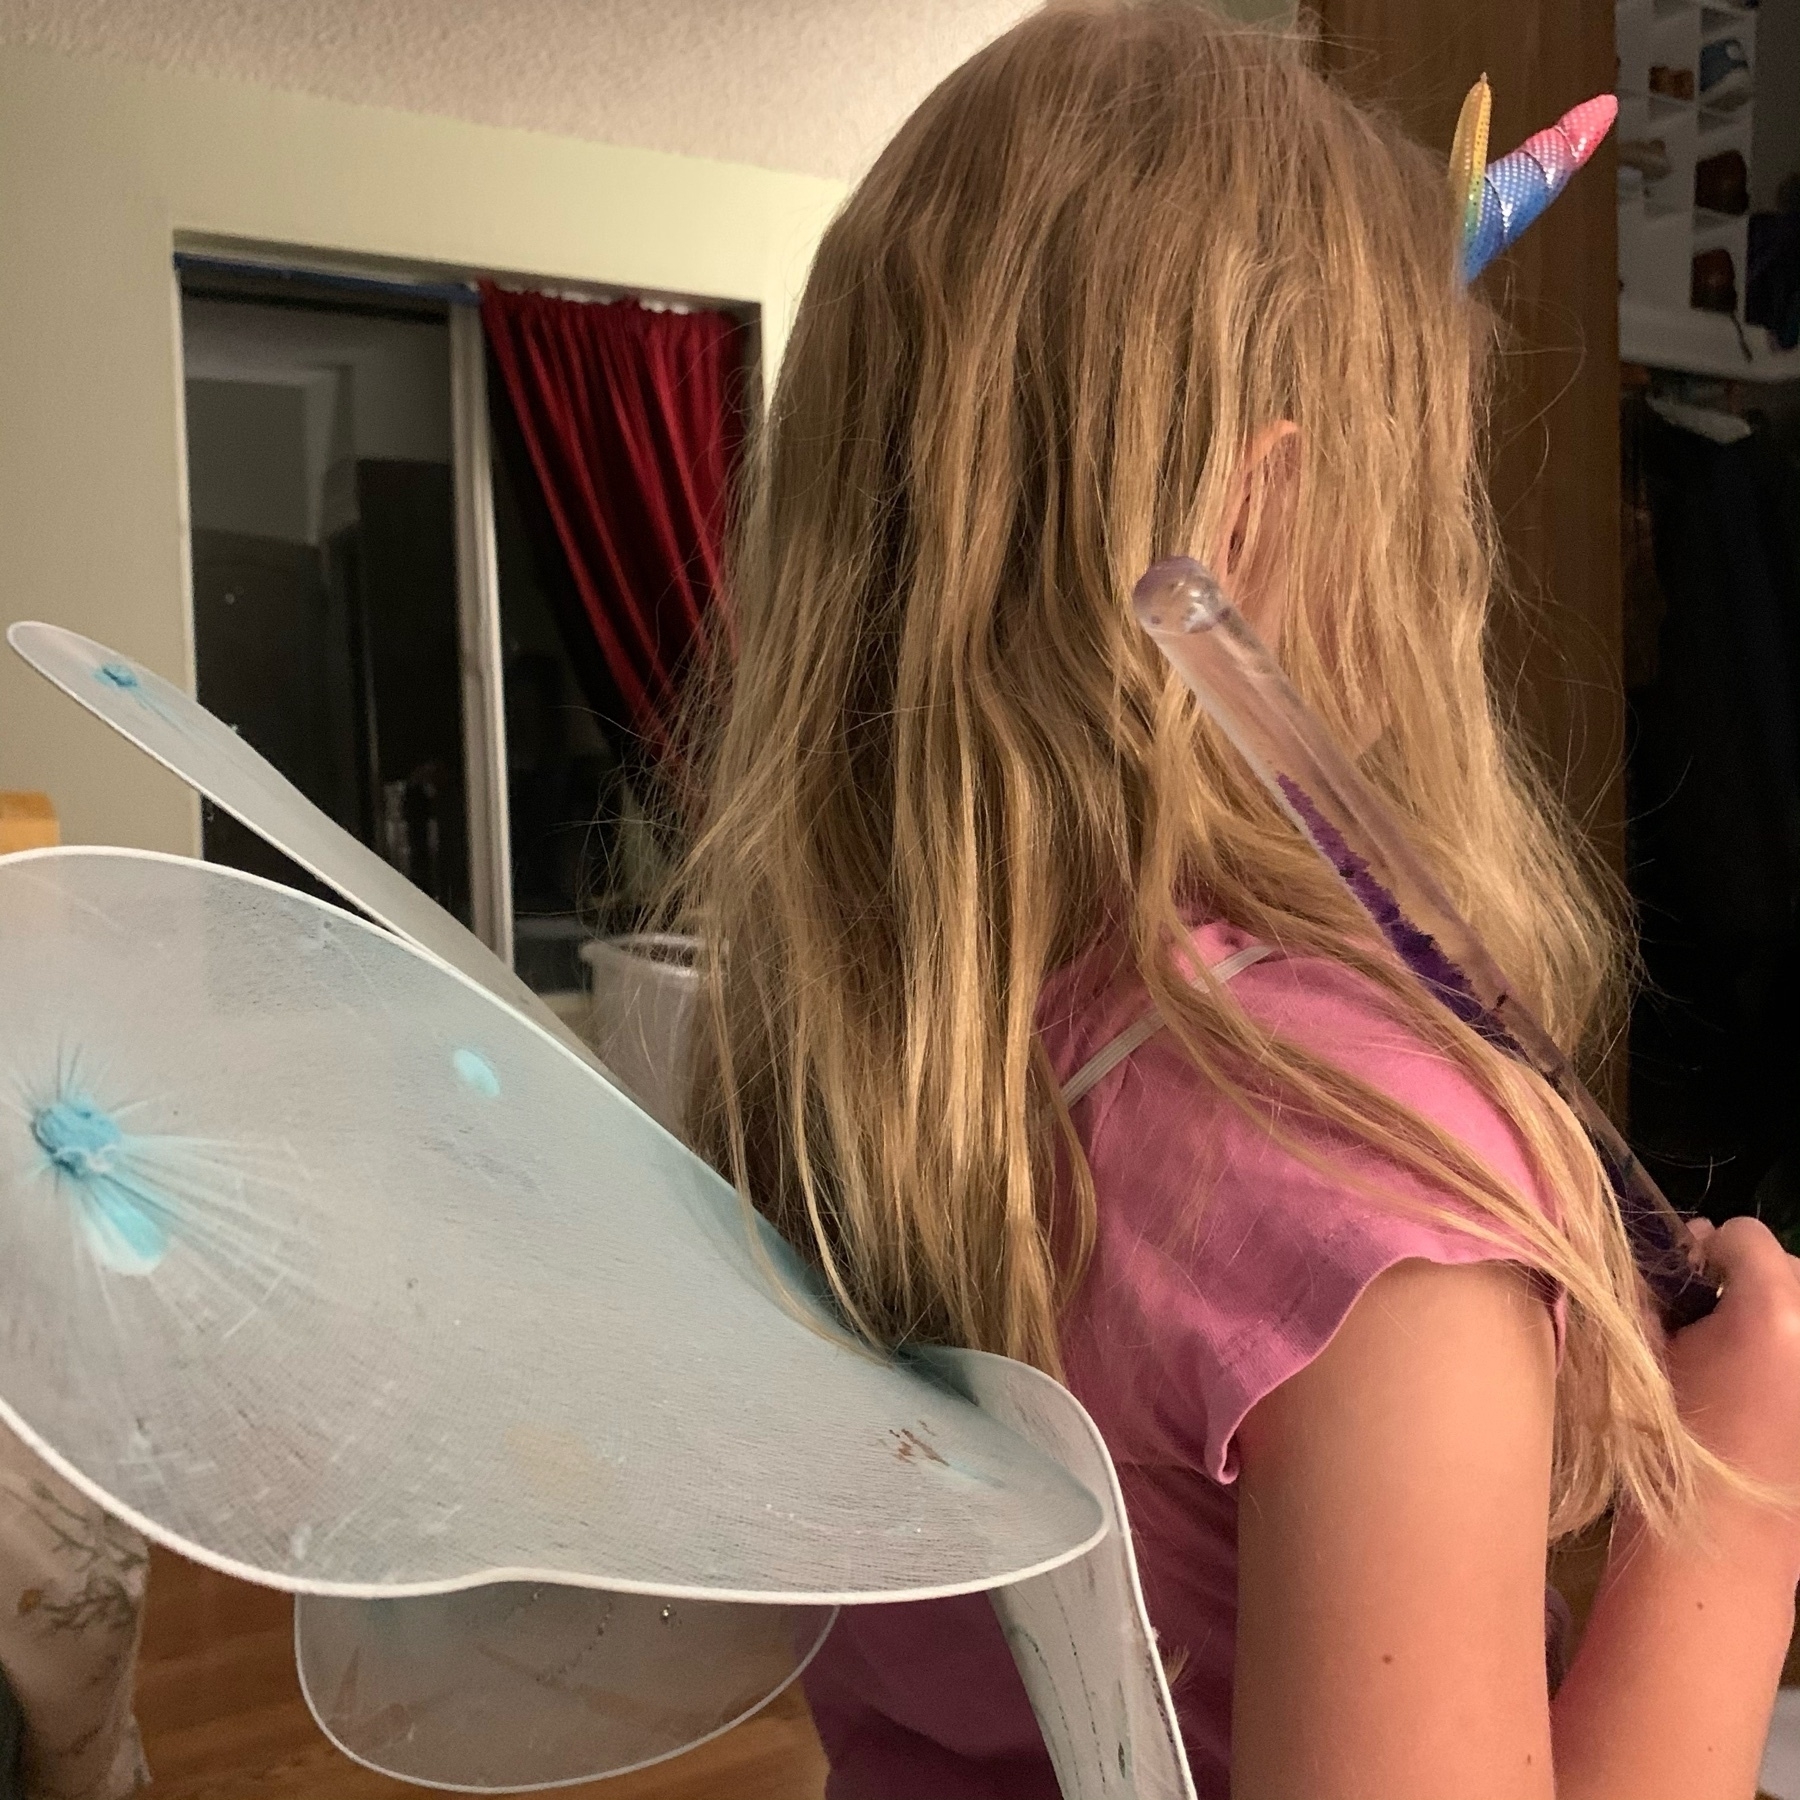 Girl holding the one while wearing wings and a unicorn headband